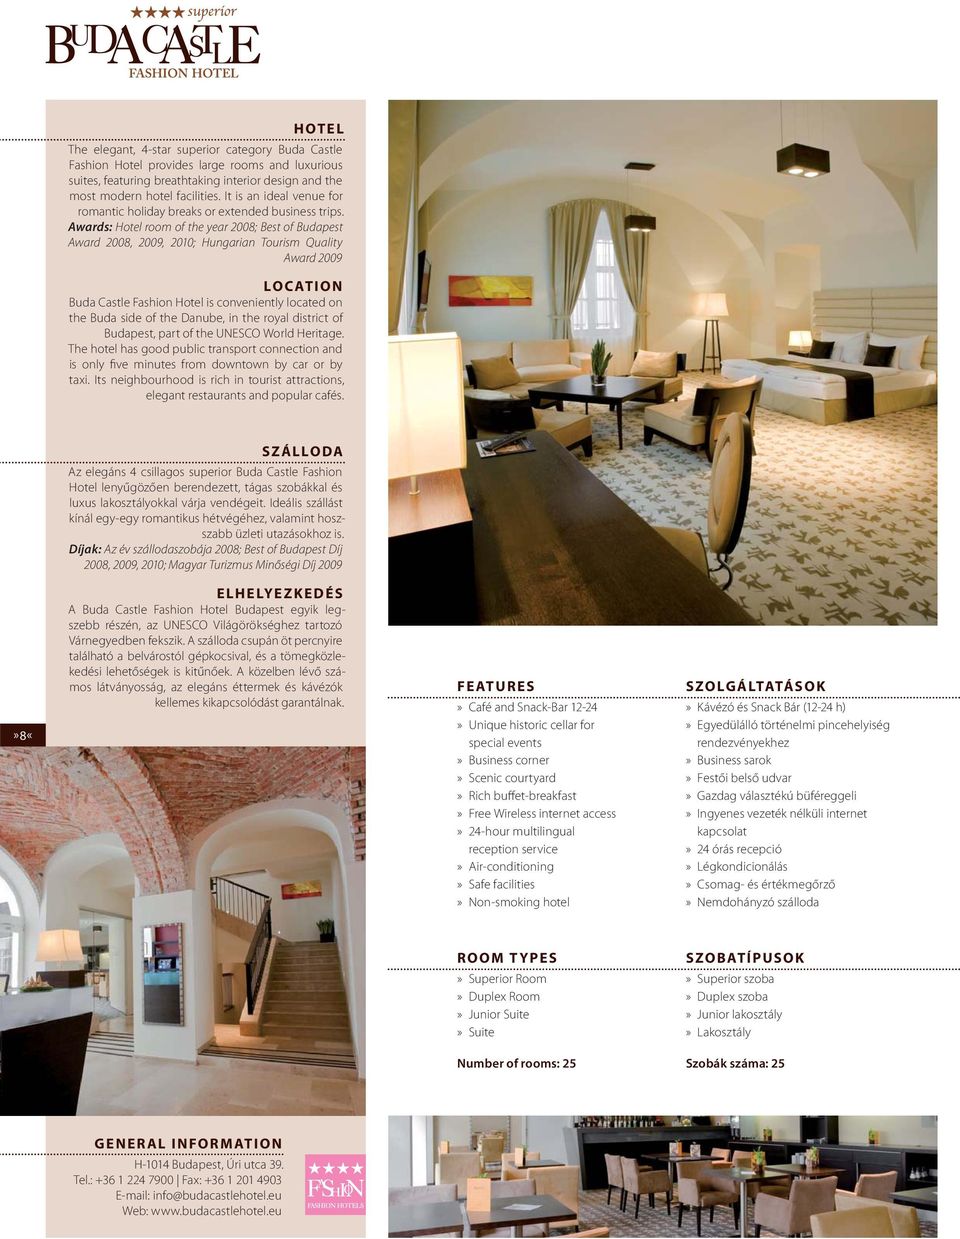 Awards: Hotel room of the year 2008; Best of Budapest Award 2008, 2009, 2010; Hungarian Tourism Quality Award 2009 LOCATION Buda Castle Fashion Hotel is conveniently located on the Buda side of the